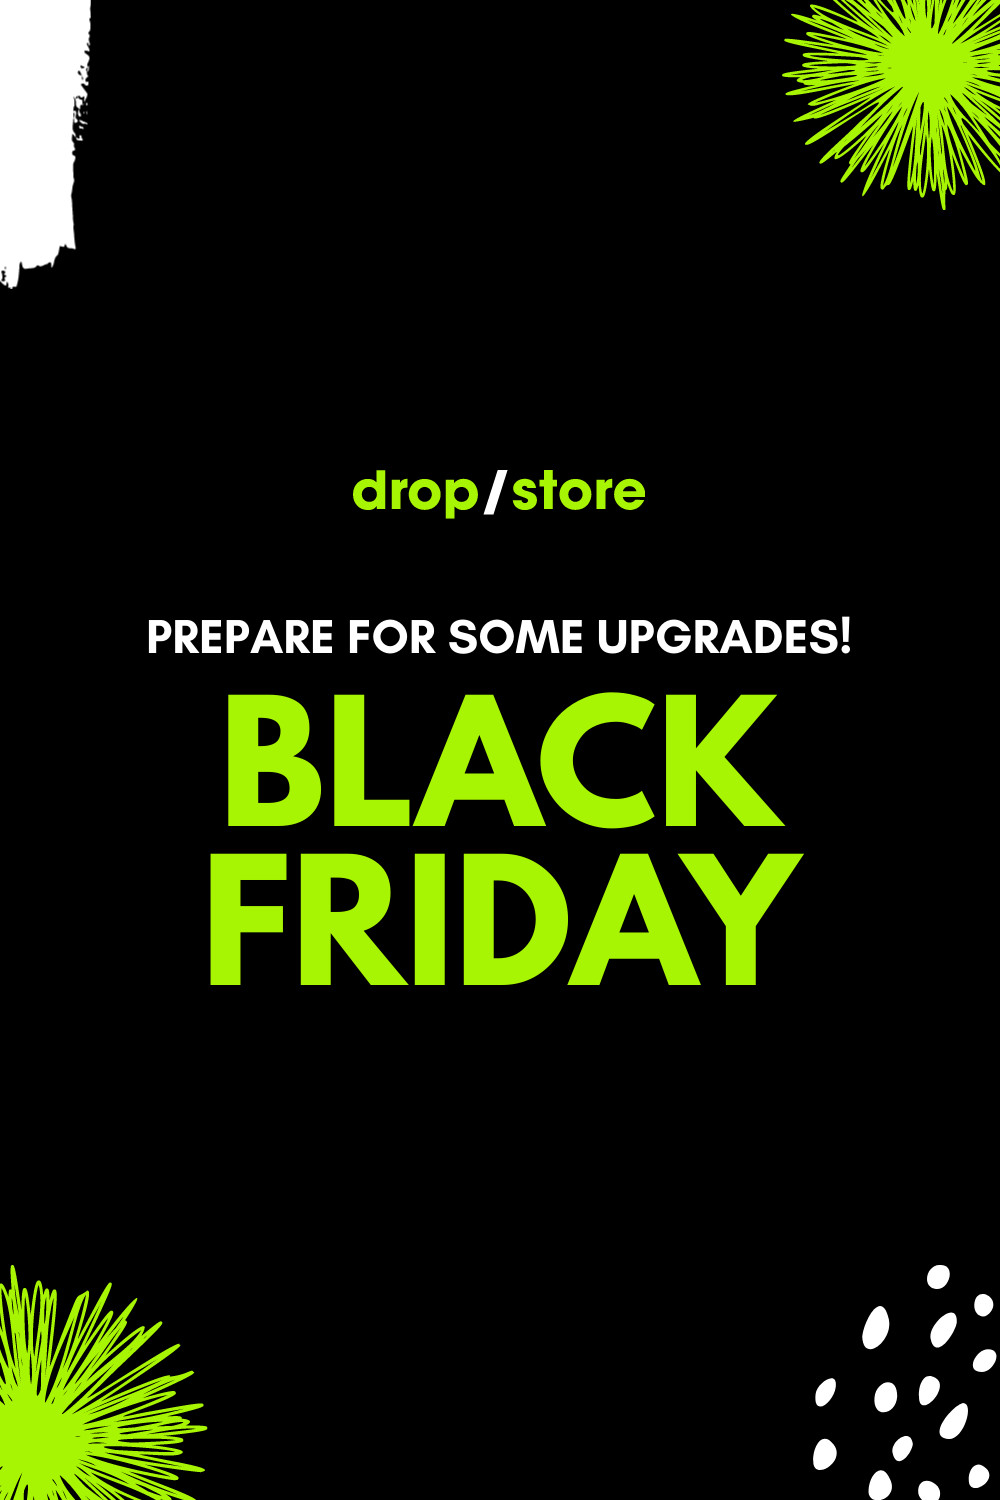 Black Friday Prepare for Upgrades Inline Rectangle 300x250